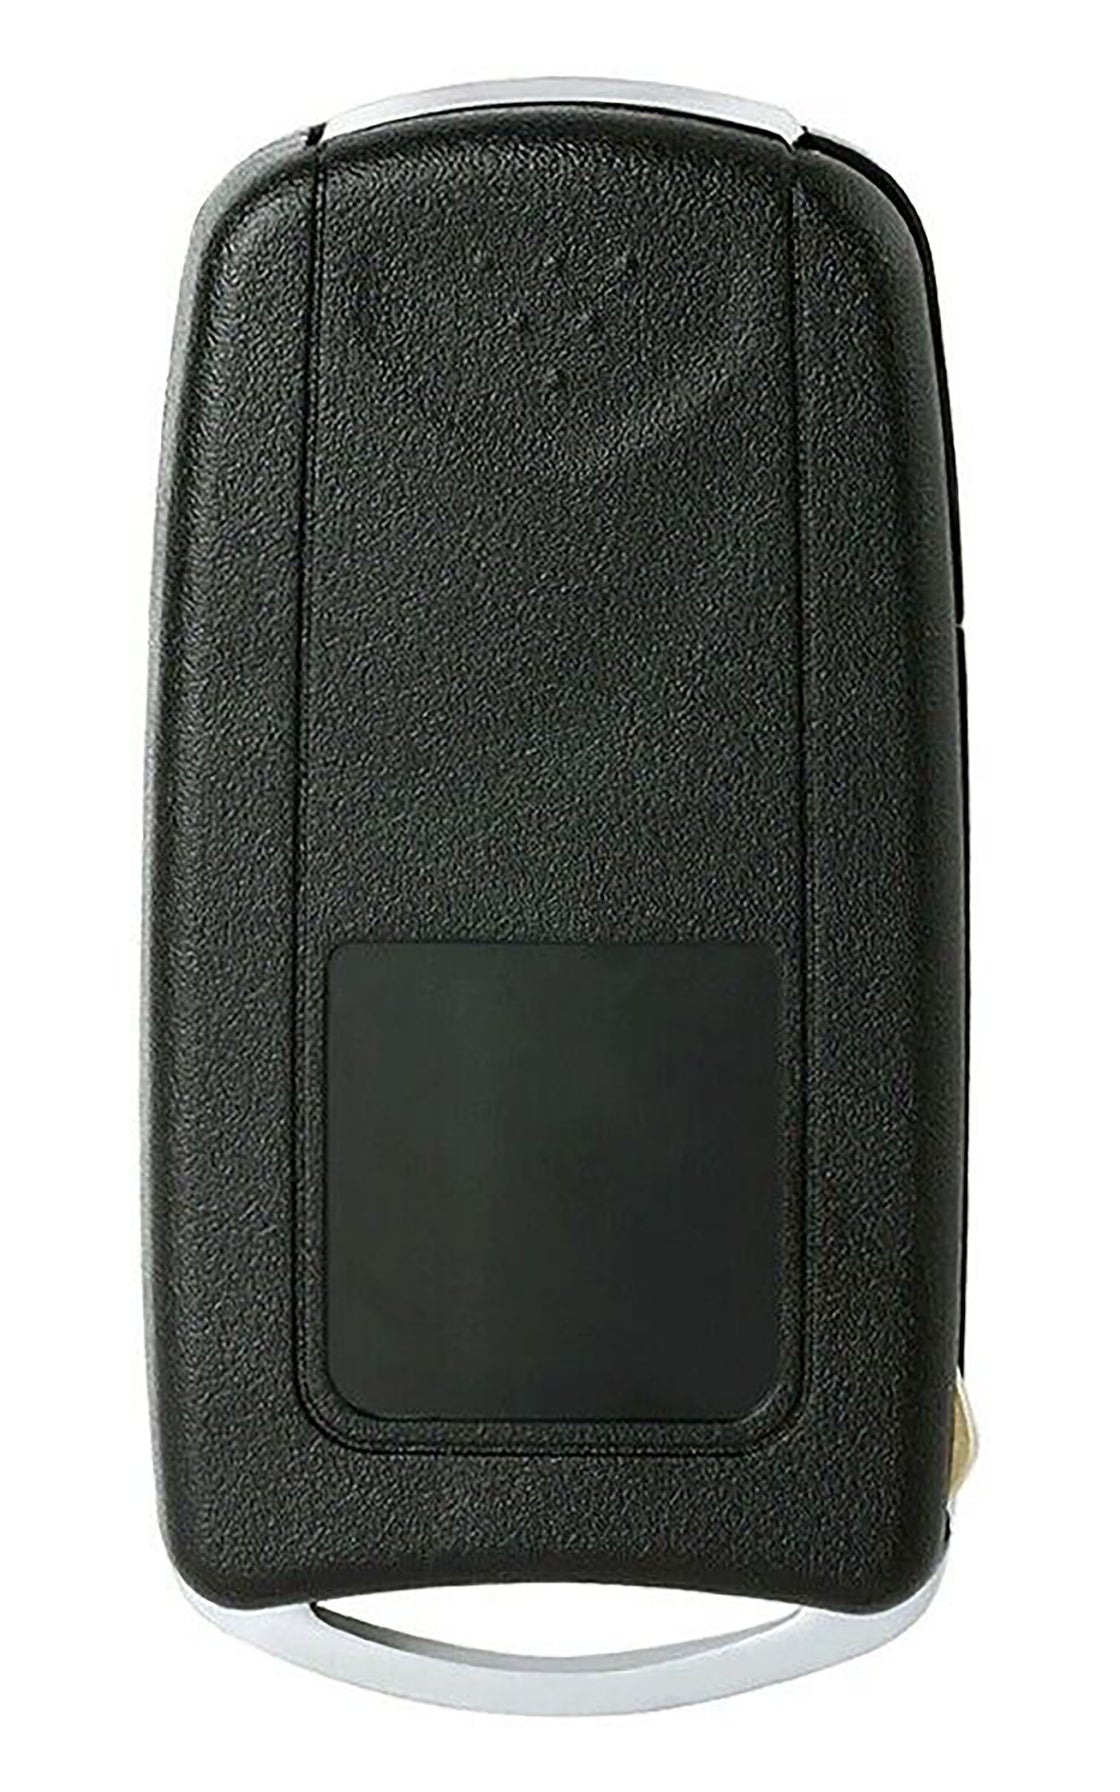 1x New Replacement Key Fob Remote Compatible with & Fit For Acura Vehicles (Check Fitment) - MPN N5F0602A1A-02